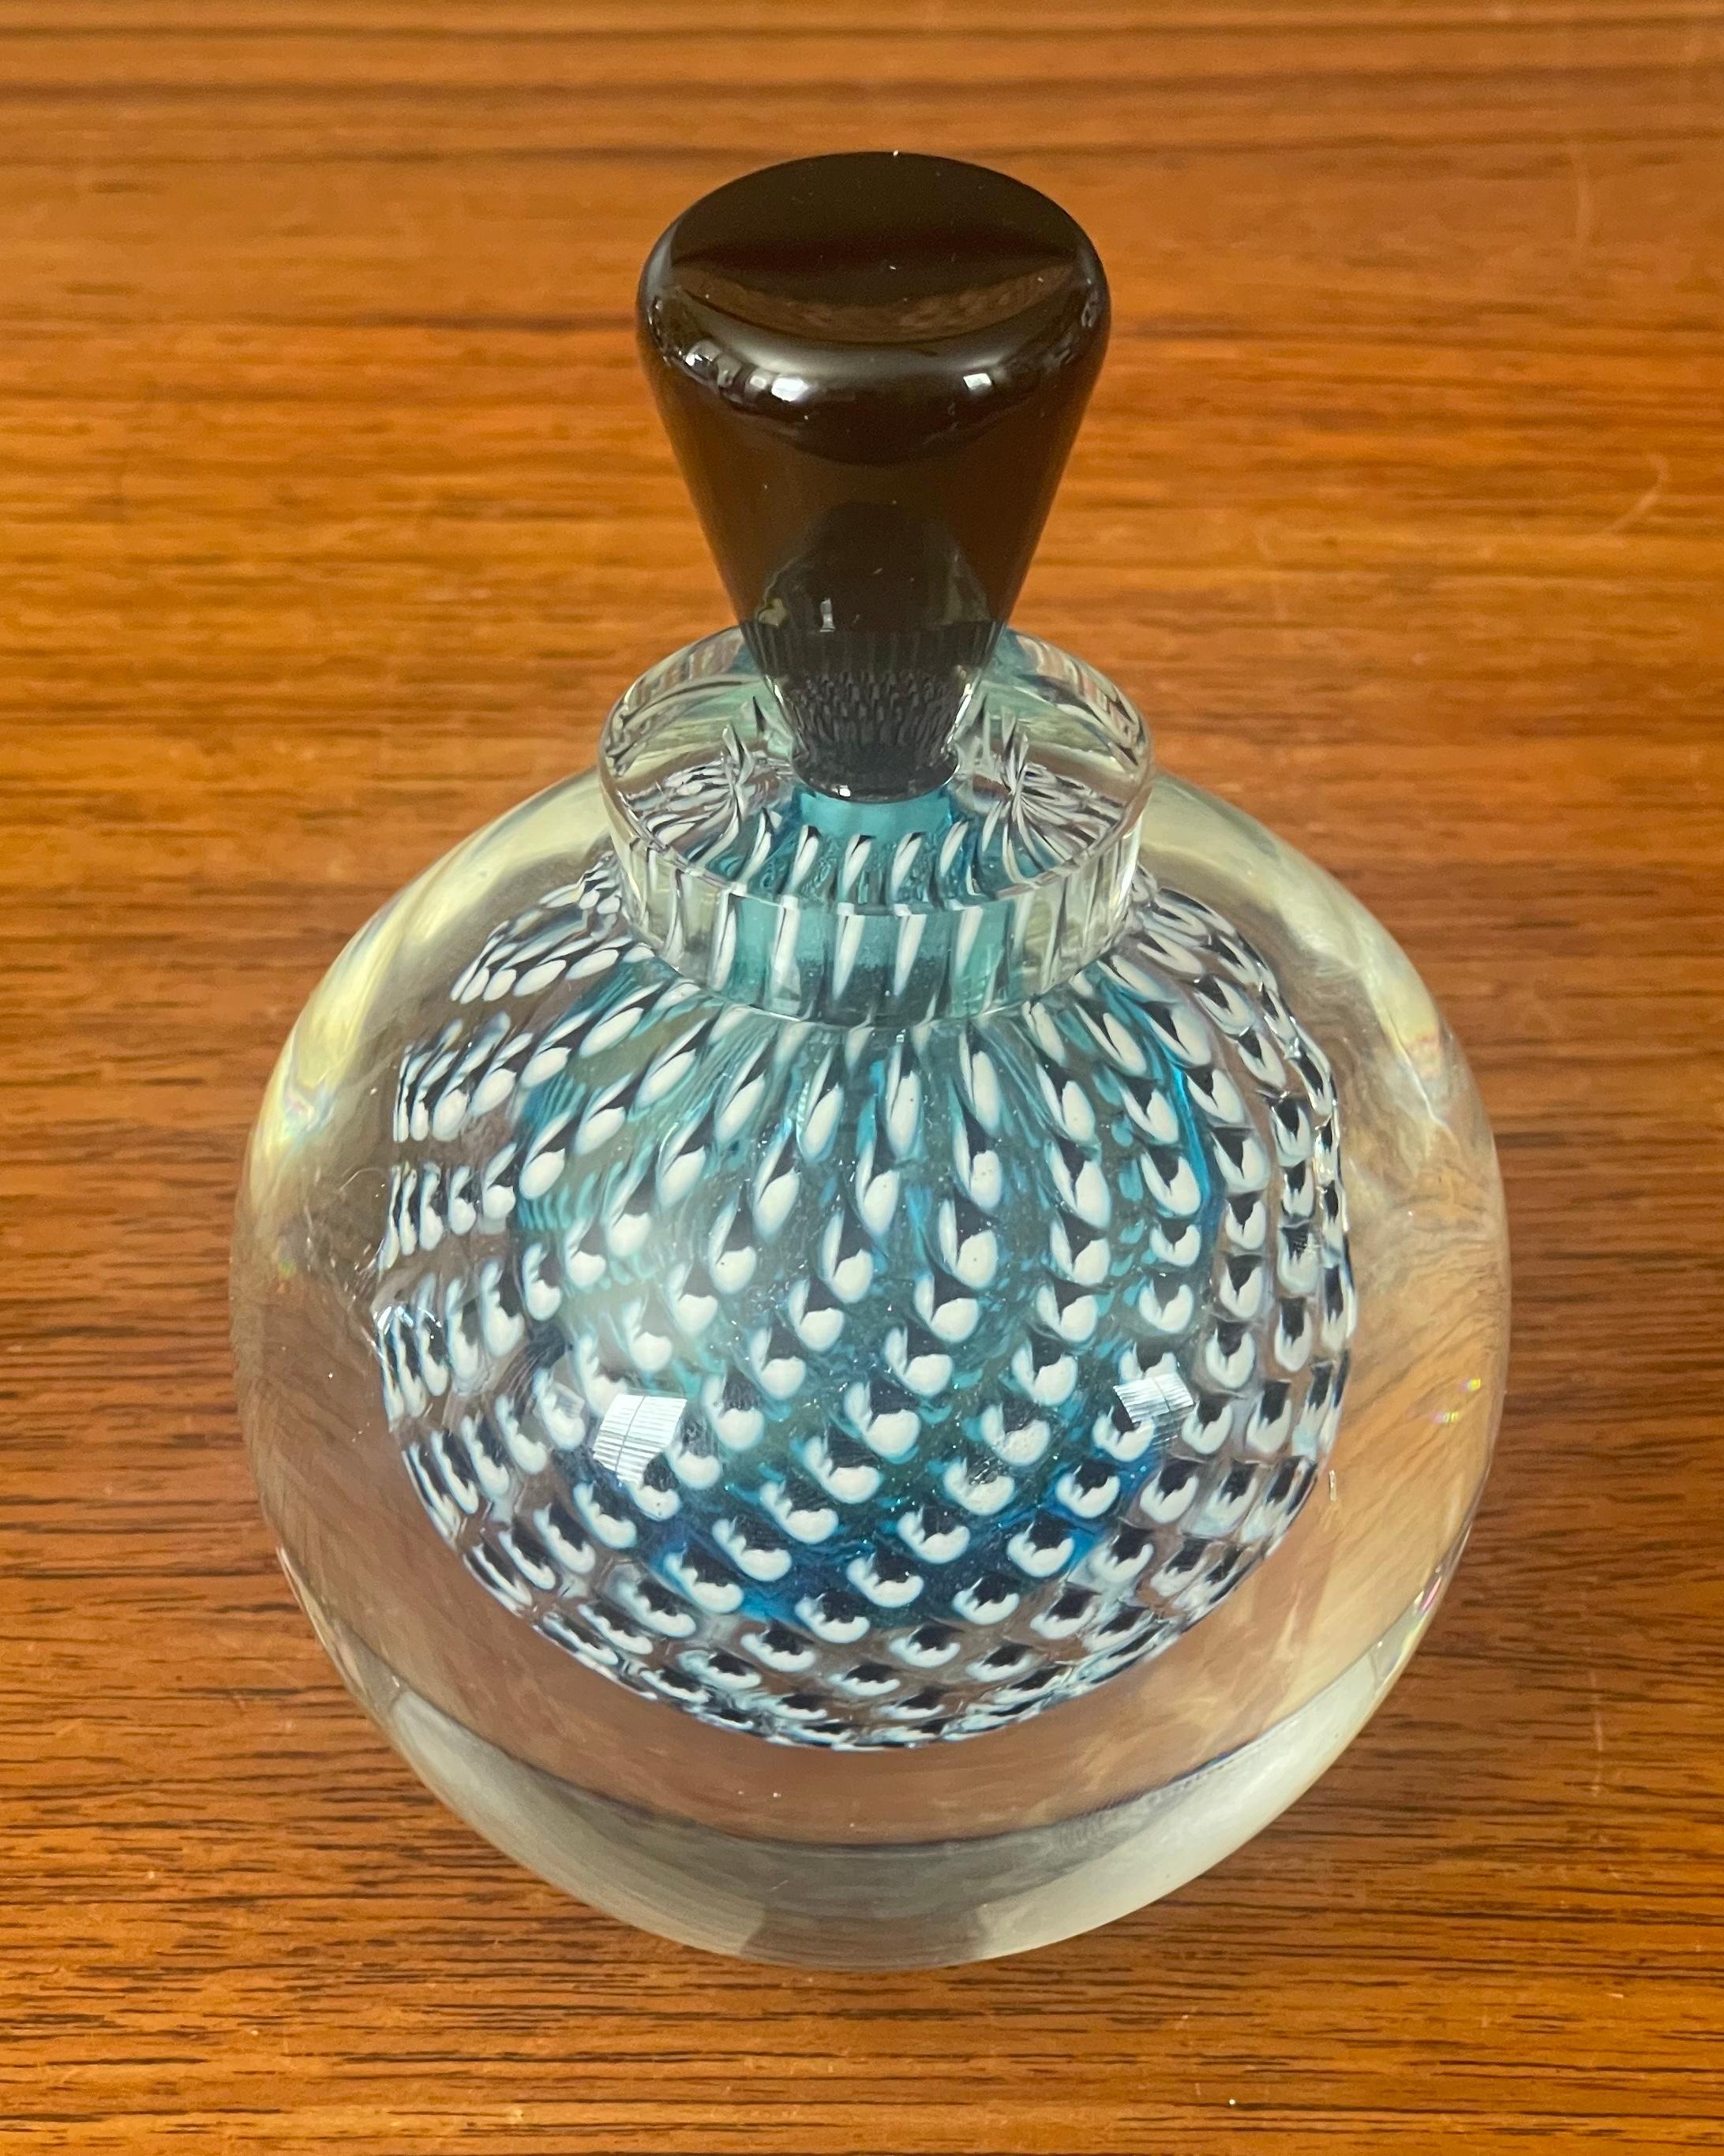 Stunning sommerso art glass perfume bottle with stopper by Steven Correia, circa 1994. This piece is absolutely gorgeous with an inner orb of blue glass with rows of black and white dots surrounded by a thick outer layer of clear glass and a black